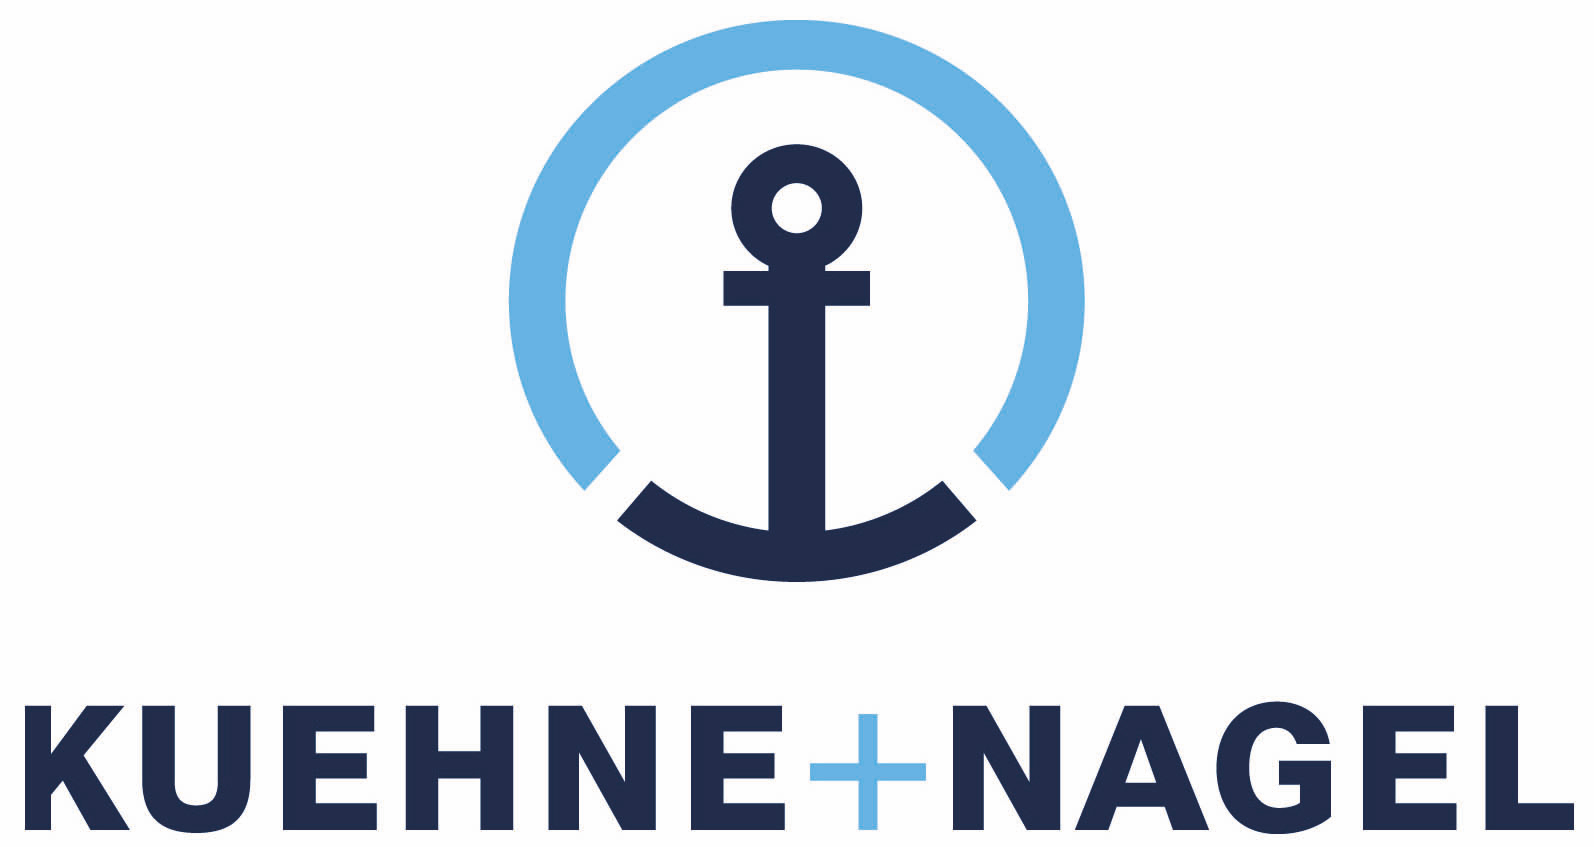 Kuehne + Nagel responds to French Competition Authority decision